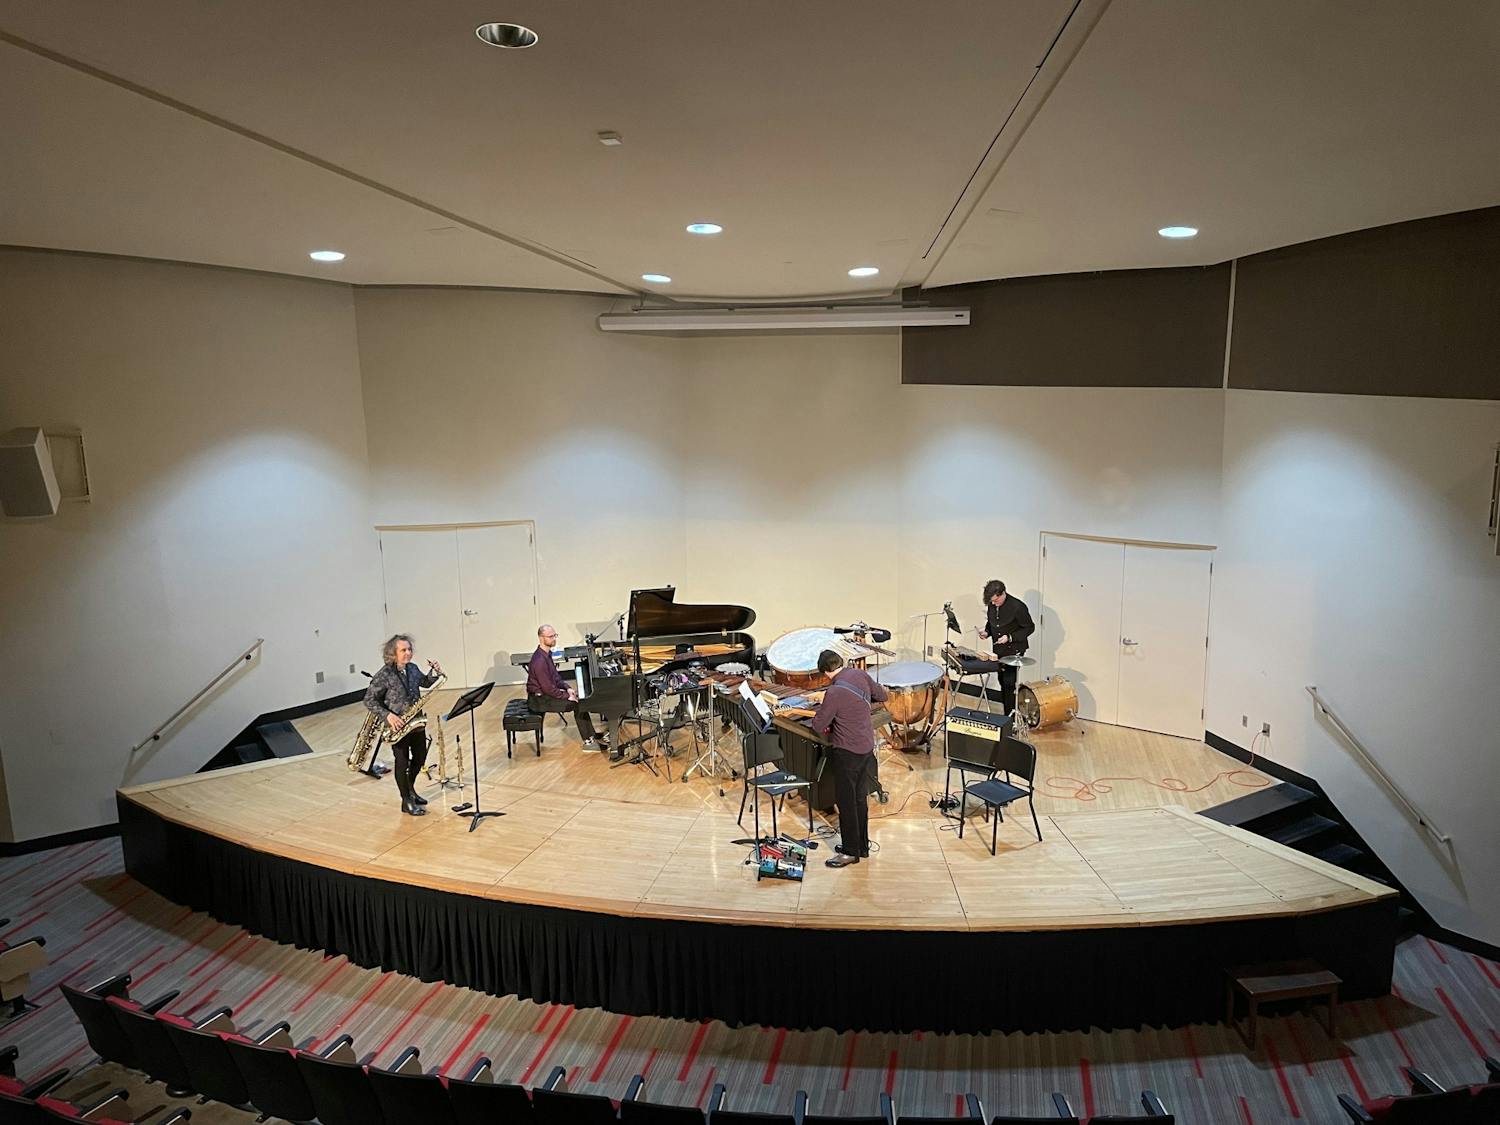 The four members of The Hinge Ensemble play the piano, saxophone, percussion, and electric guitar.